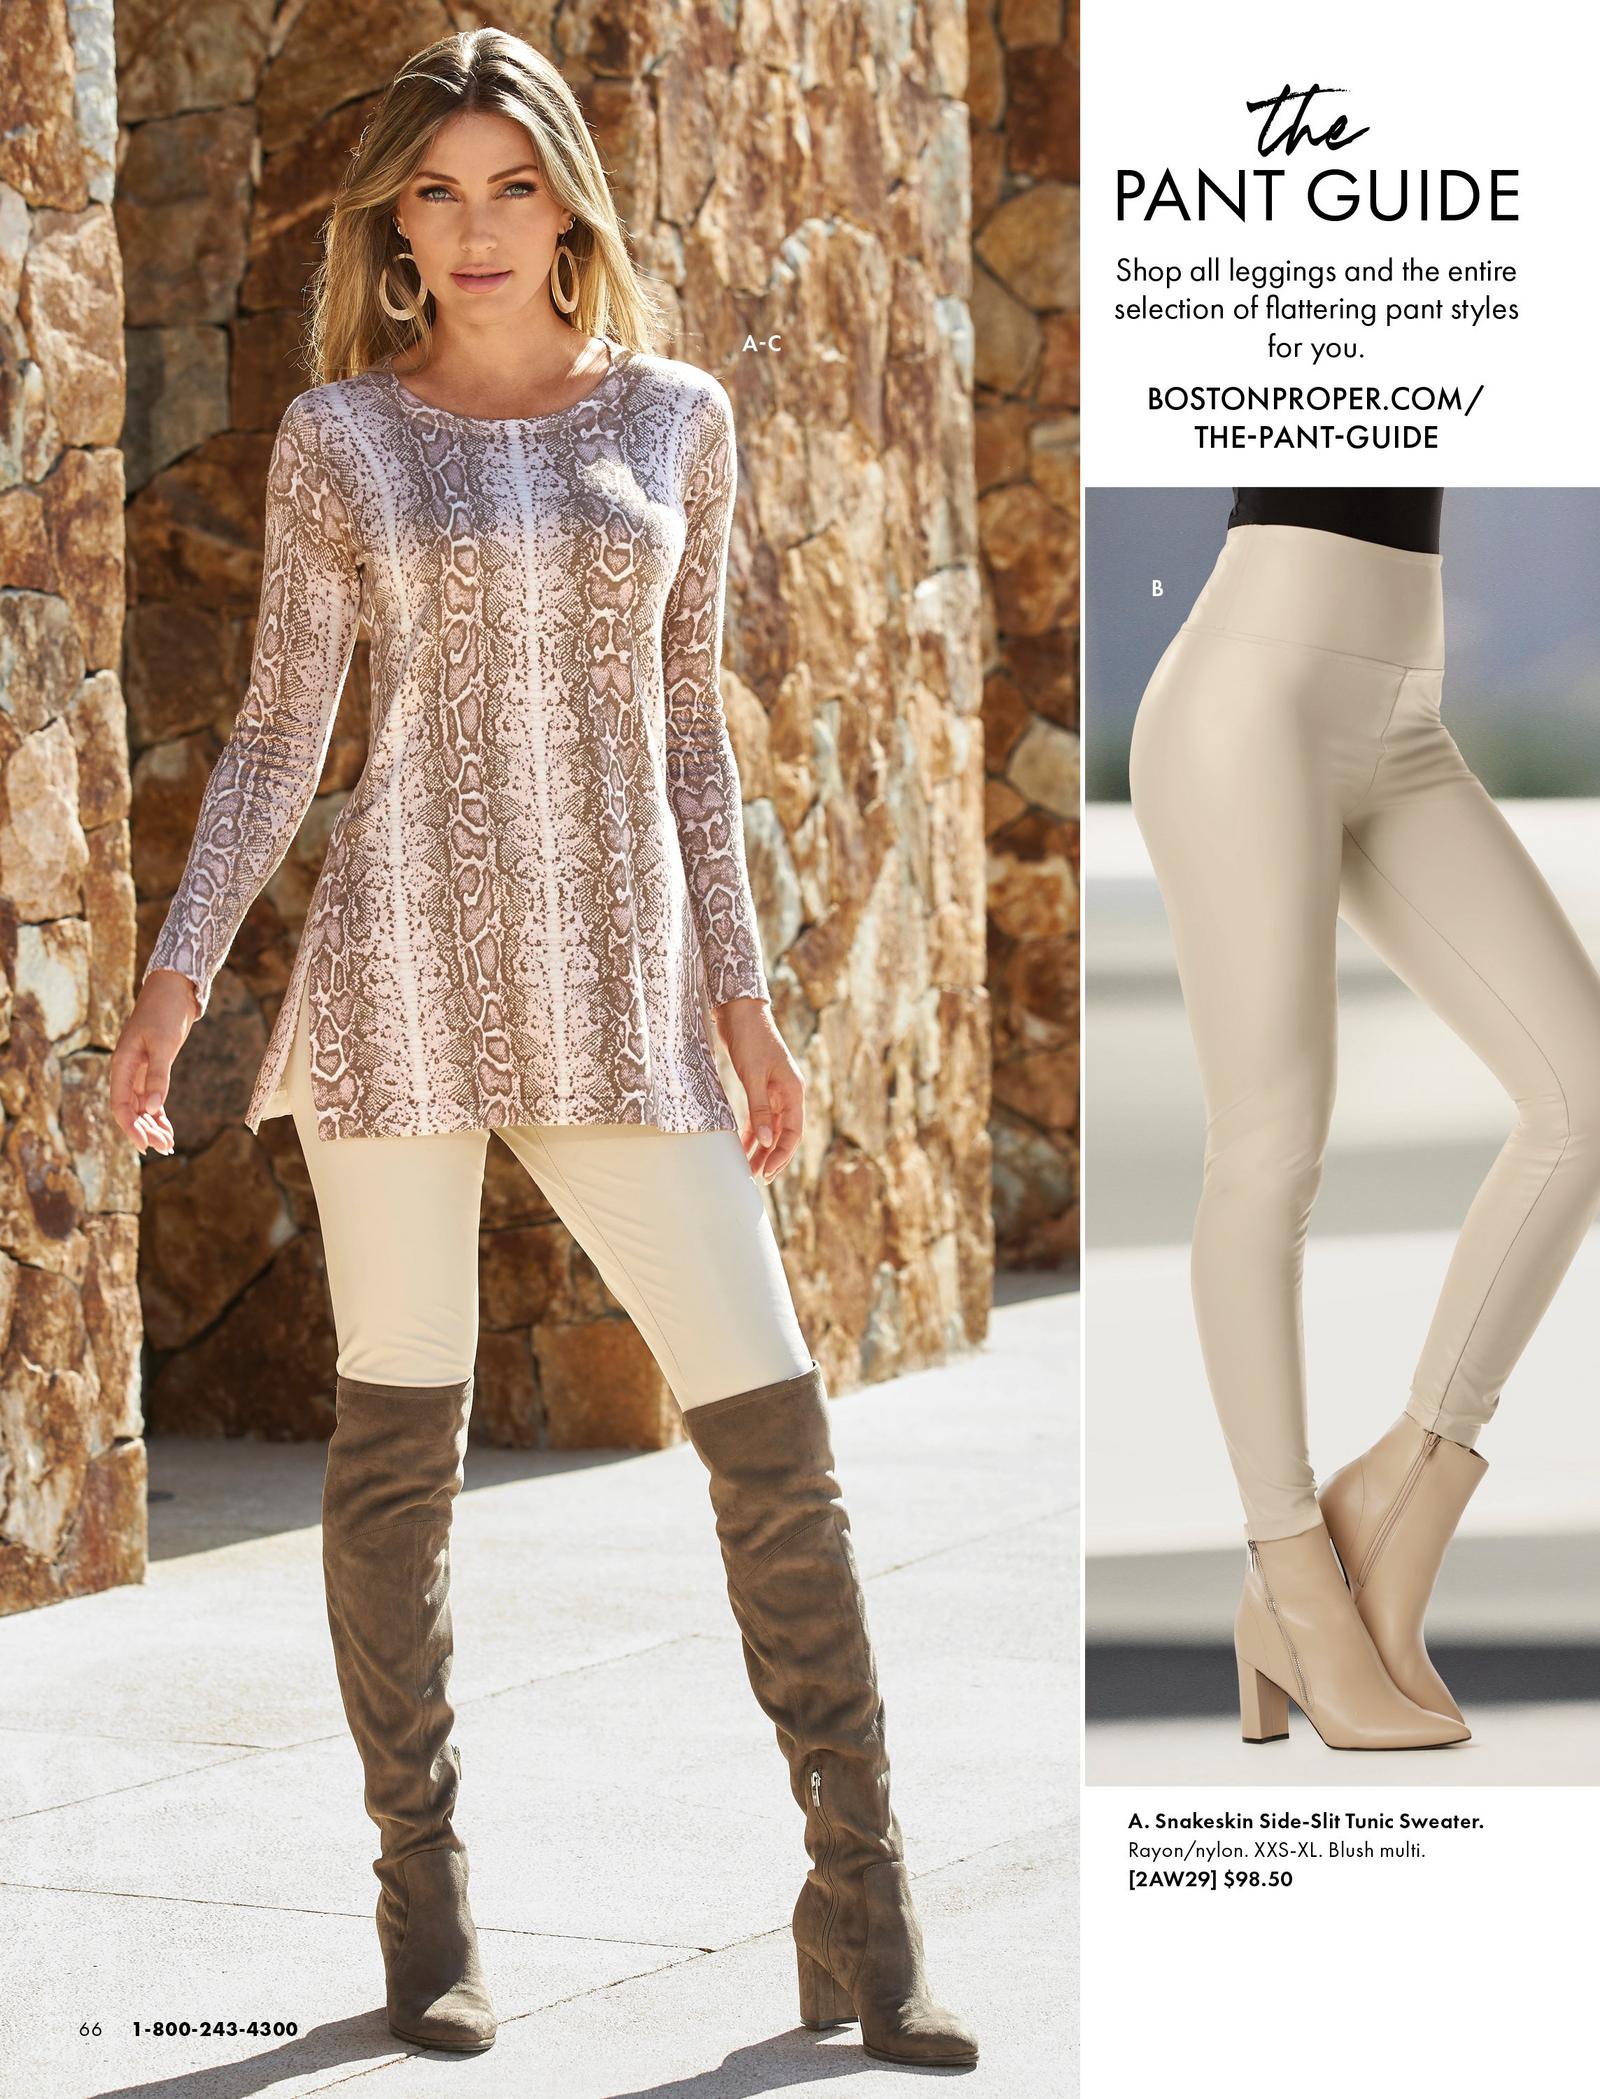 left model wearing a brown python print tunic sweater, light tan faux-leather leggings, and taupe over-the-knee boots. also shown: the faux-leather leggings.